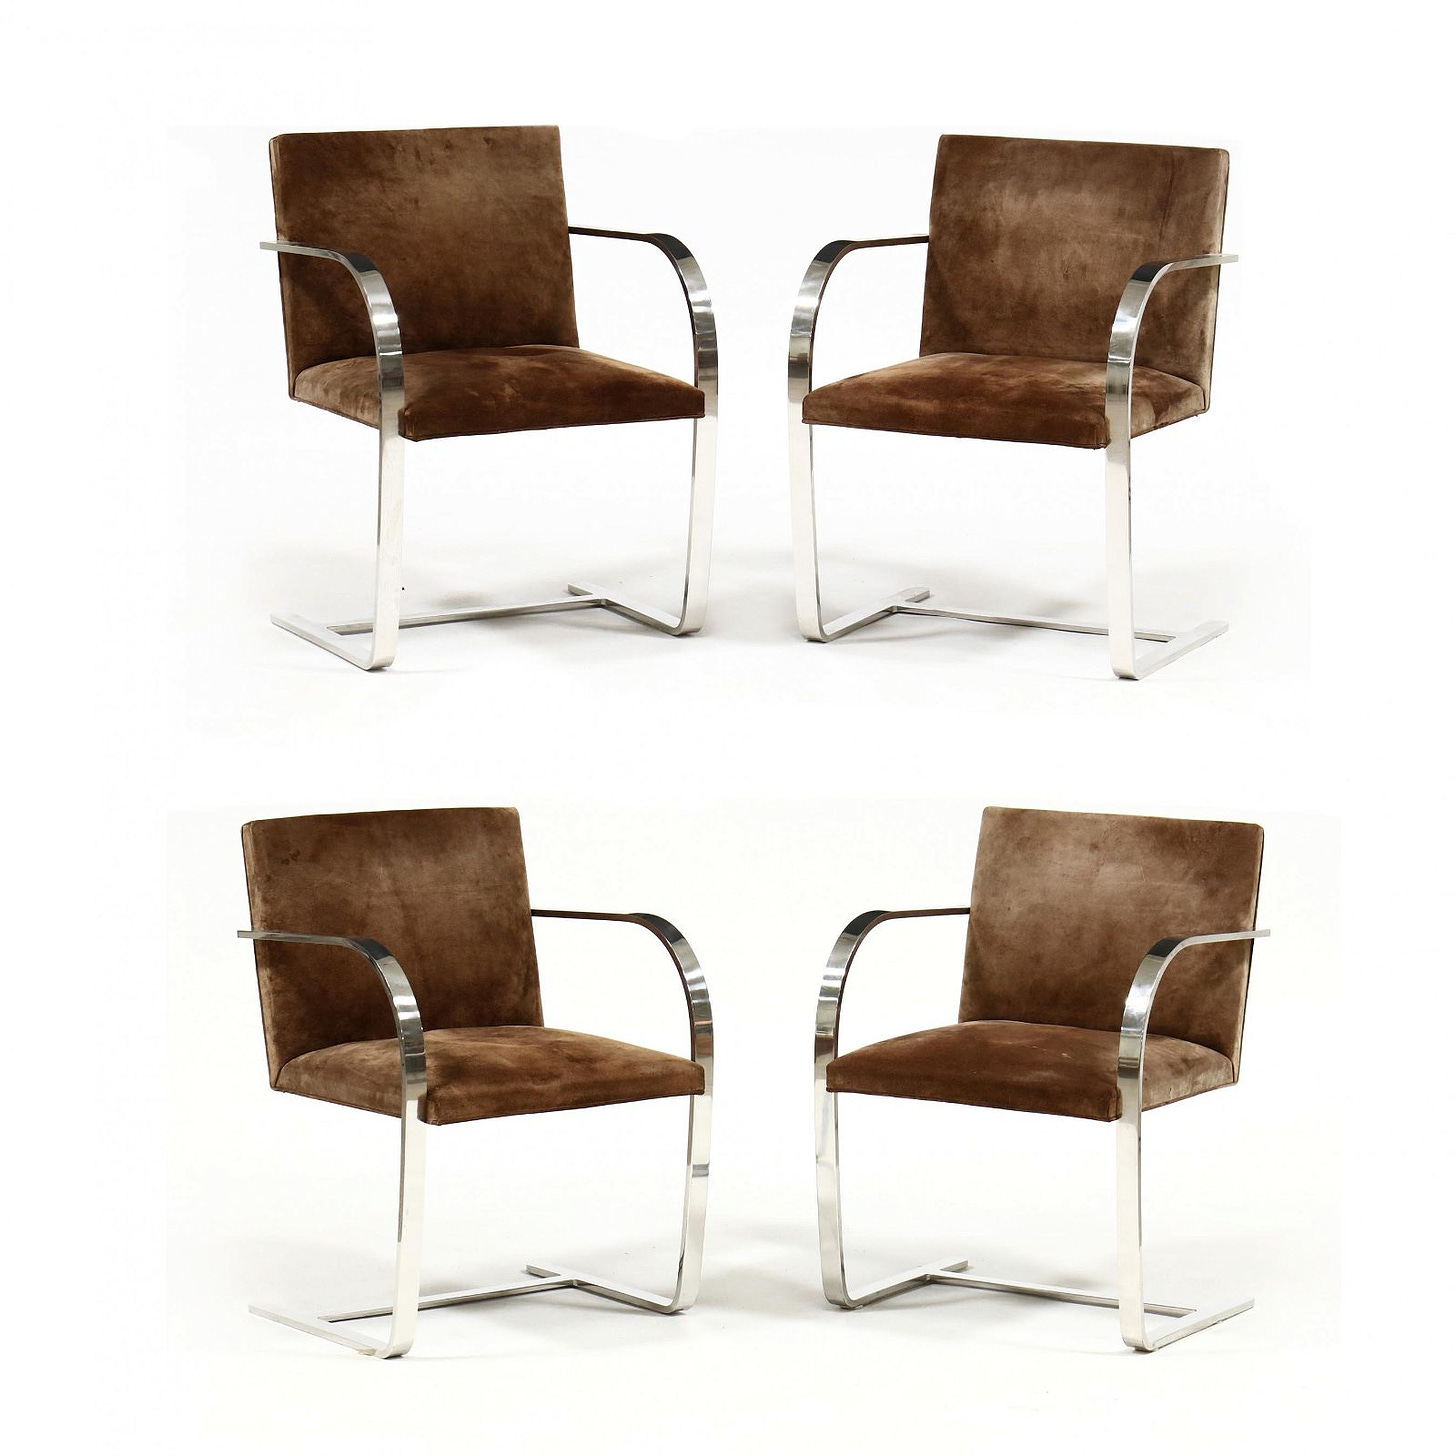 Ludwig Mies van der Rohe and Lilly Reich, Four BRNO Chairs